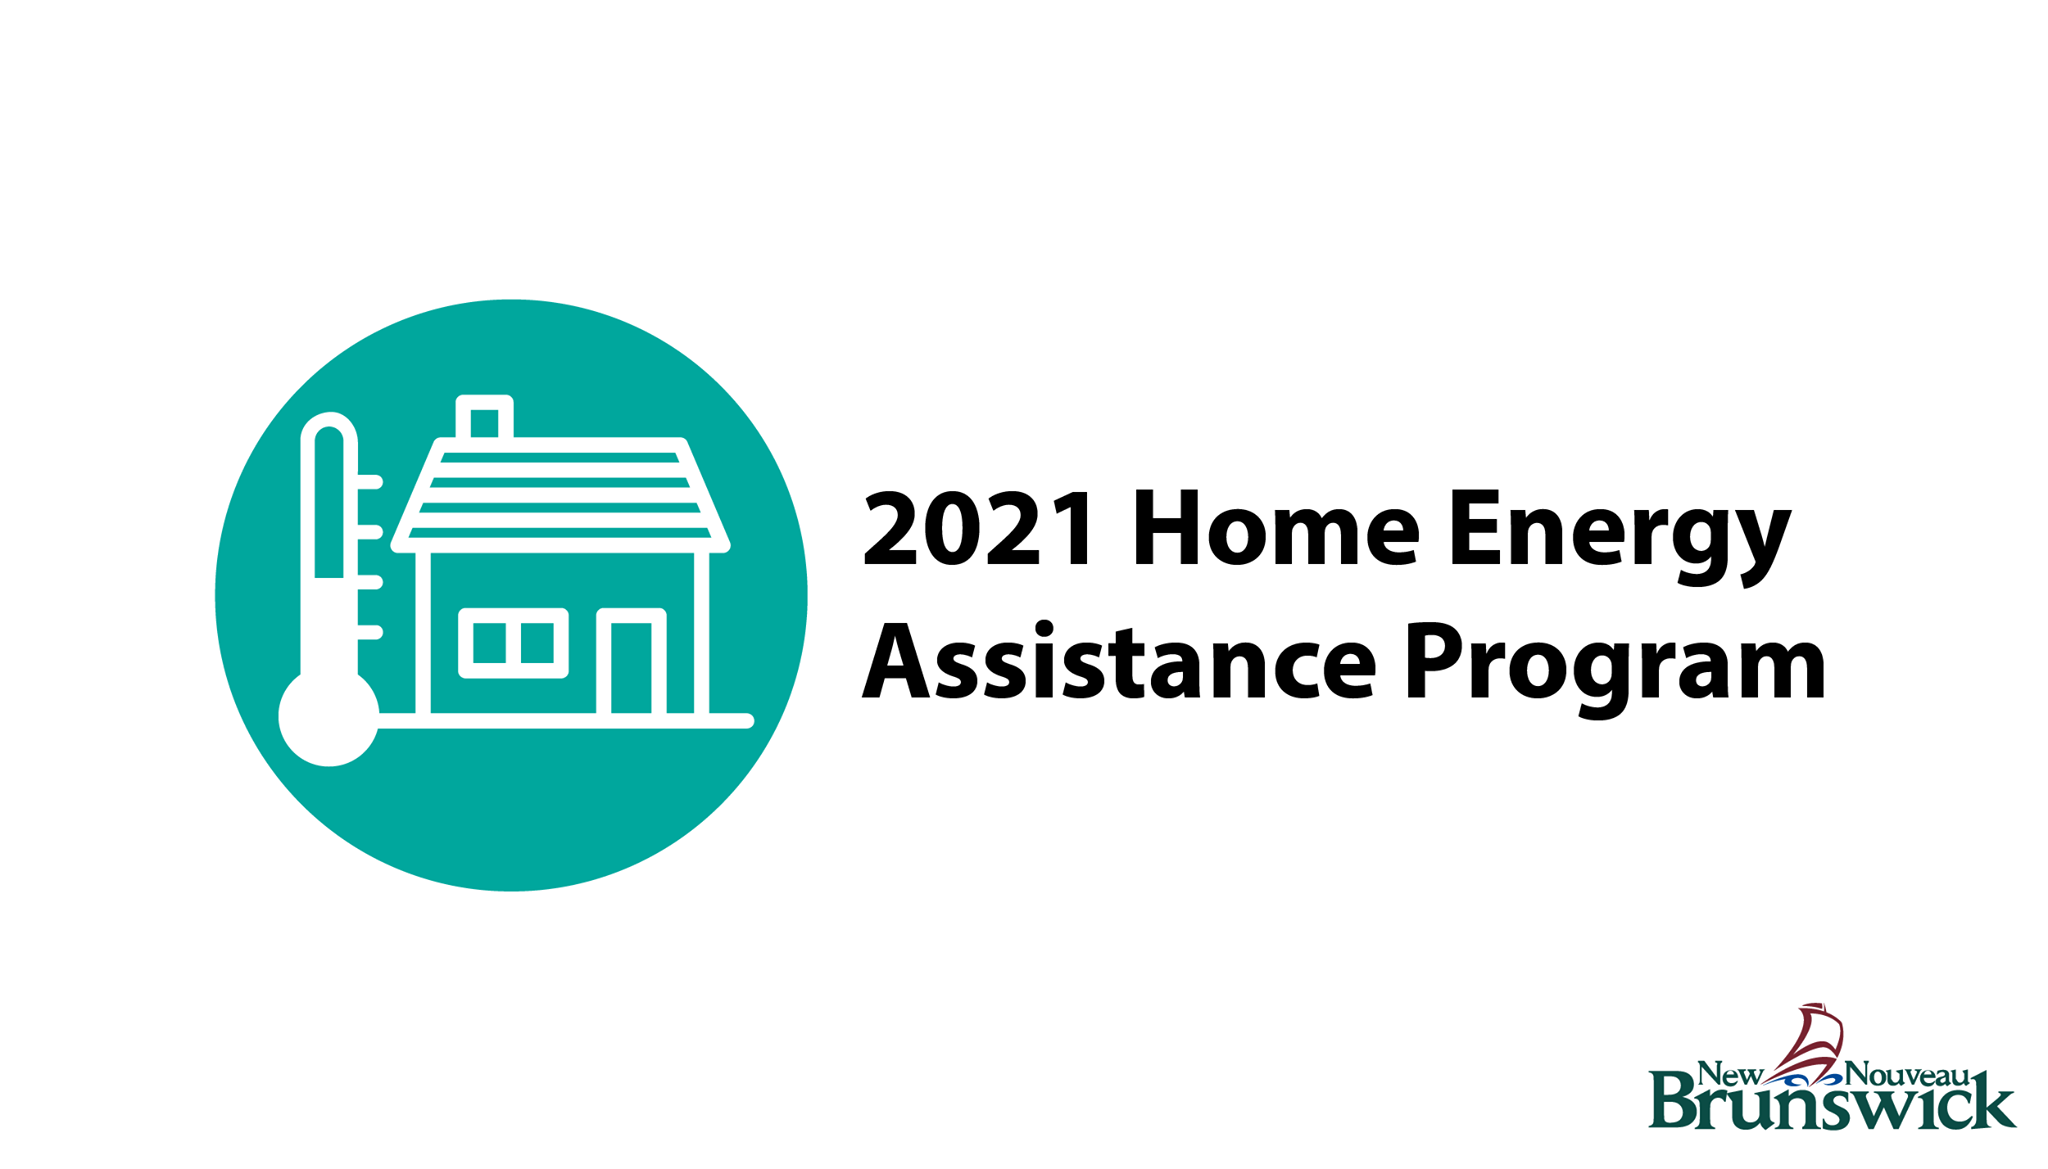 Application Forms For The Home Energy Assistance Program Now Open Blog 1039 Max Fm 1146